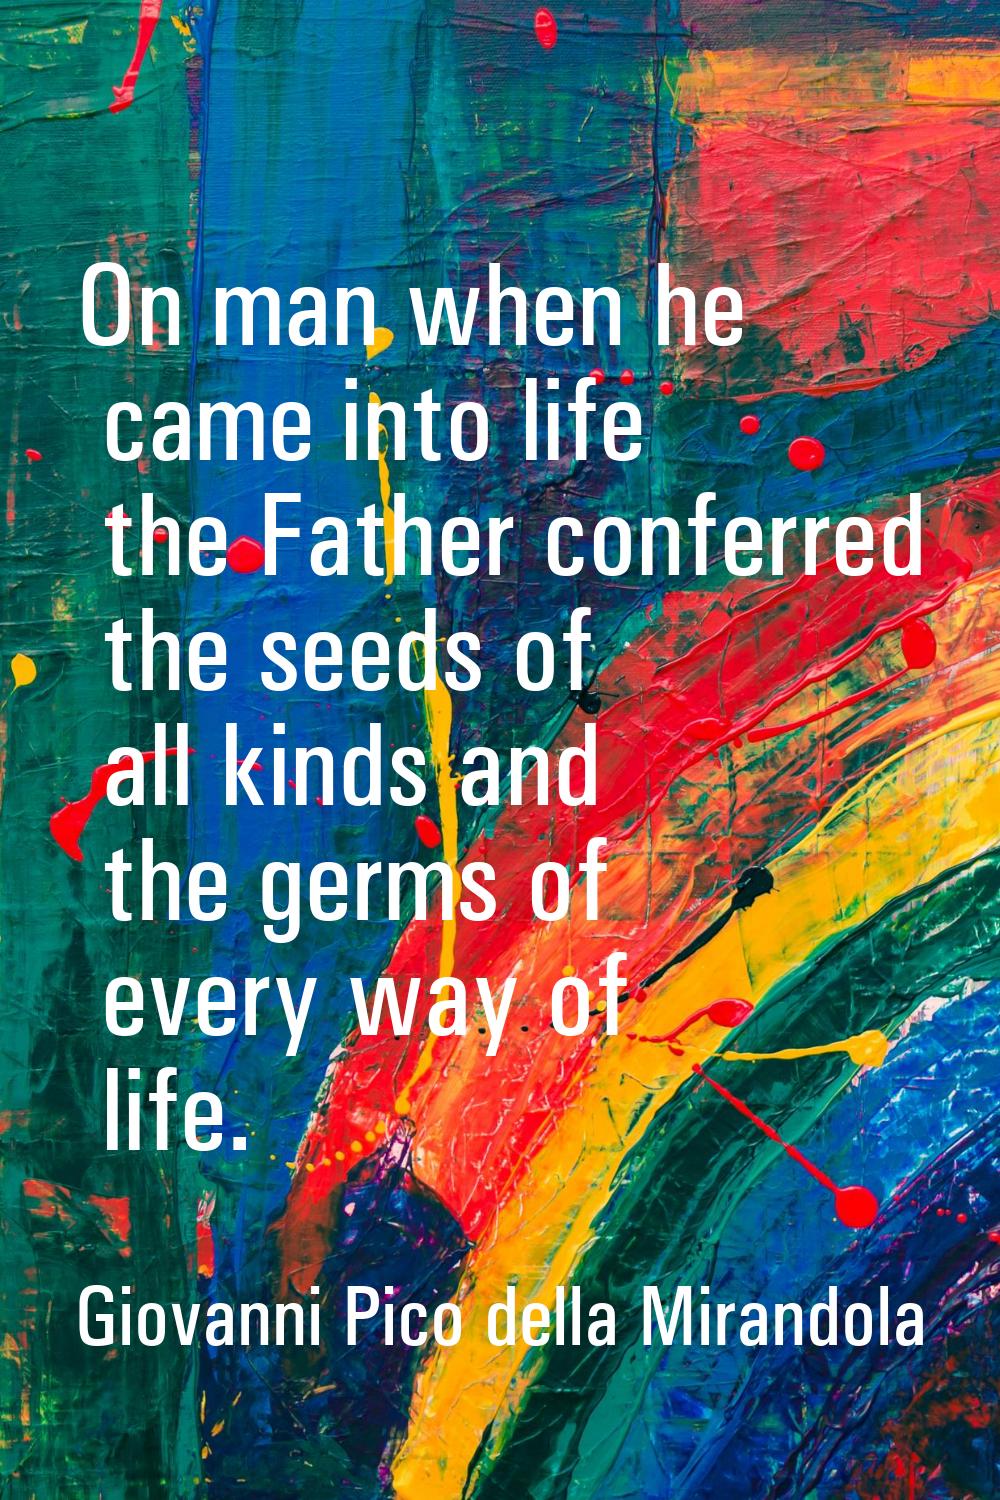 On man when he came into life the Father conferred the seeds of all kinds and the germs of every wa